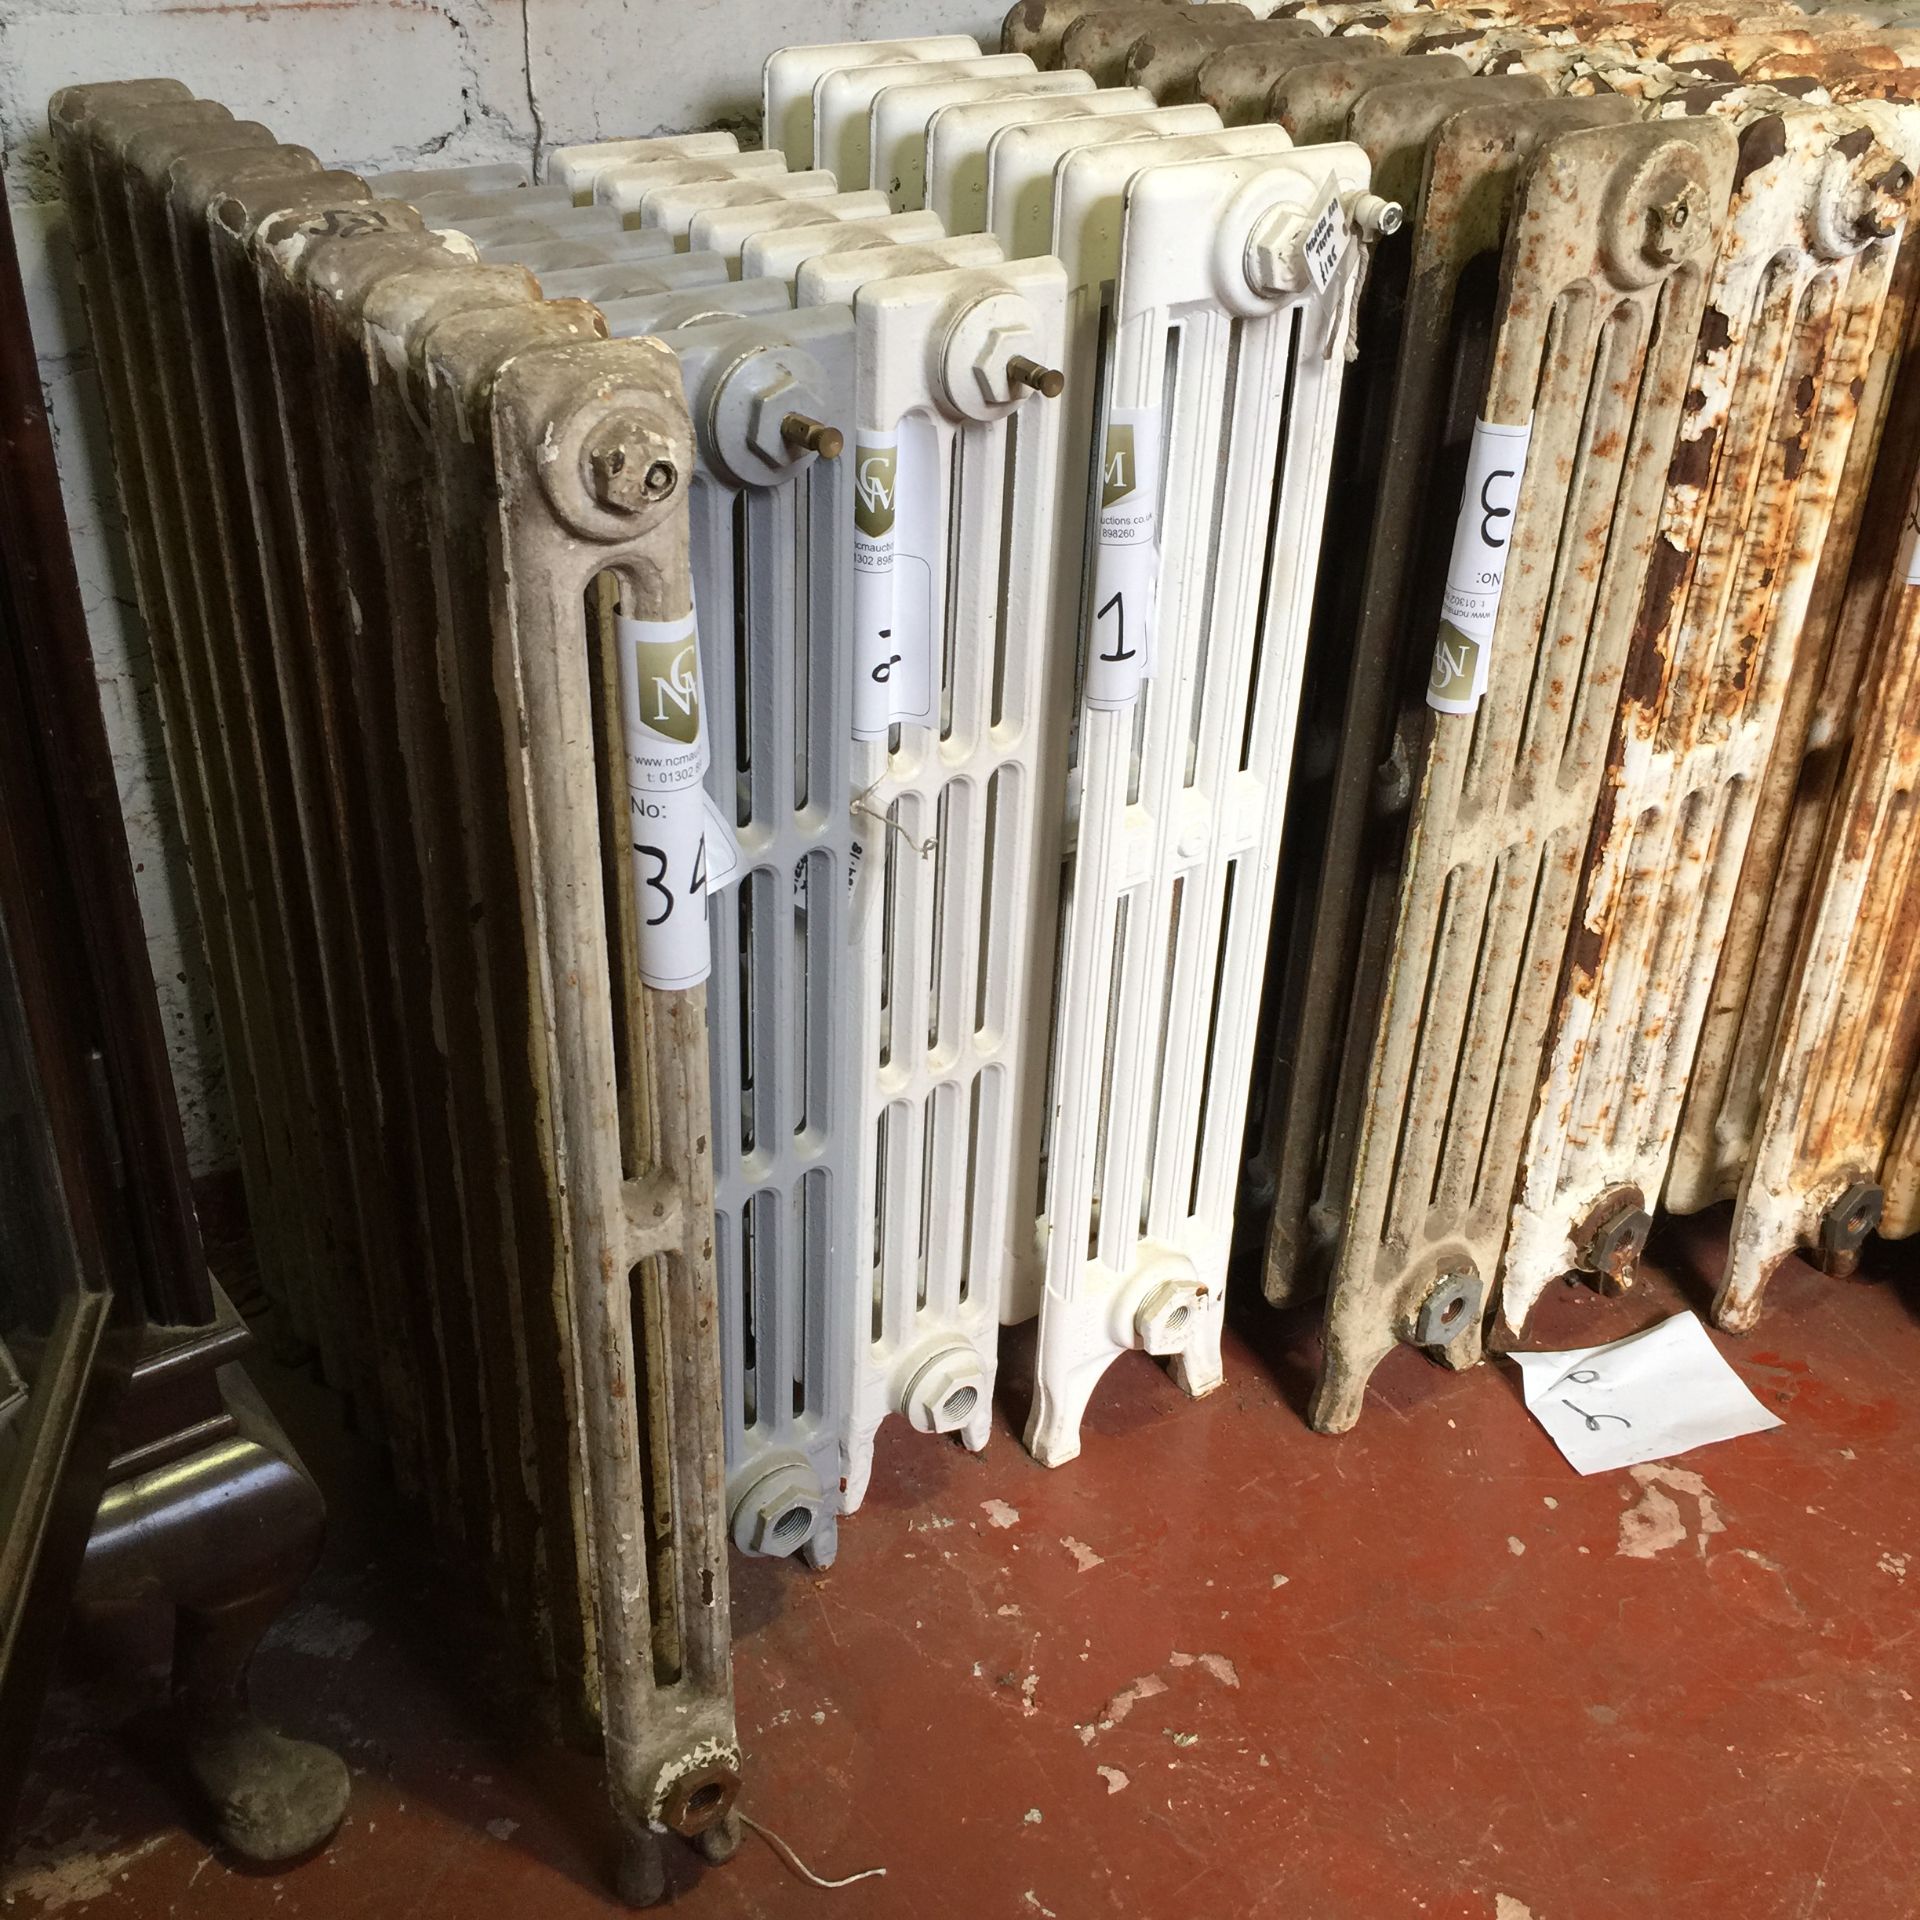 Sort after by interior designers -new cast iron radiator pressure tested and flushed 21 x 30